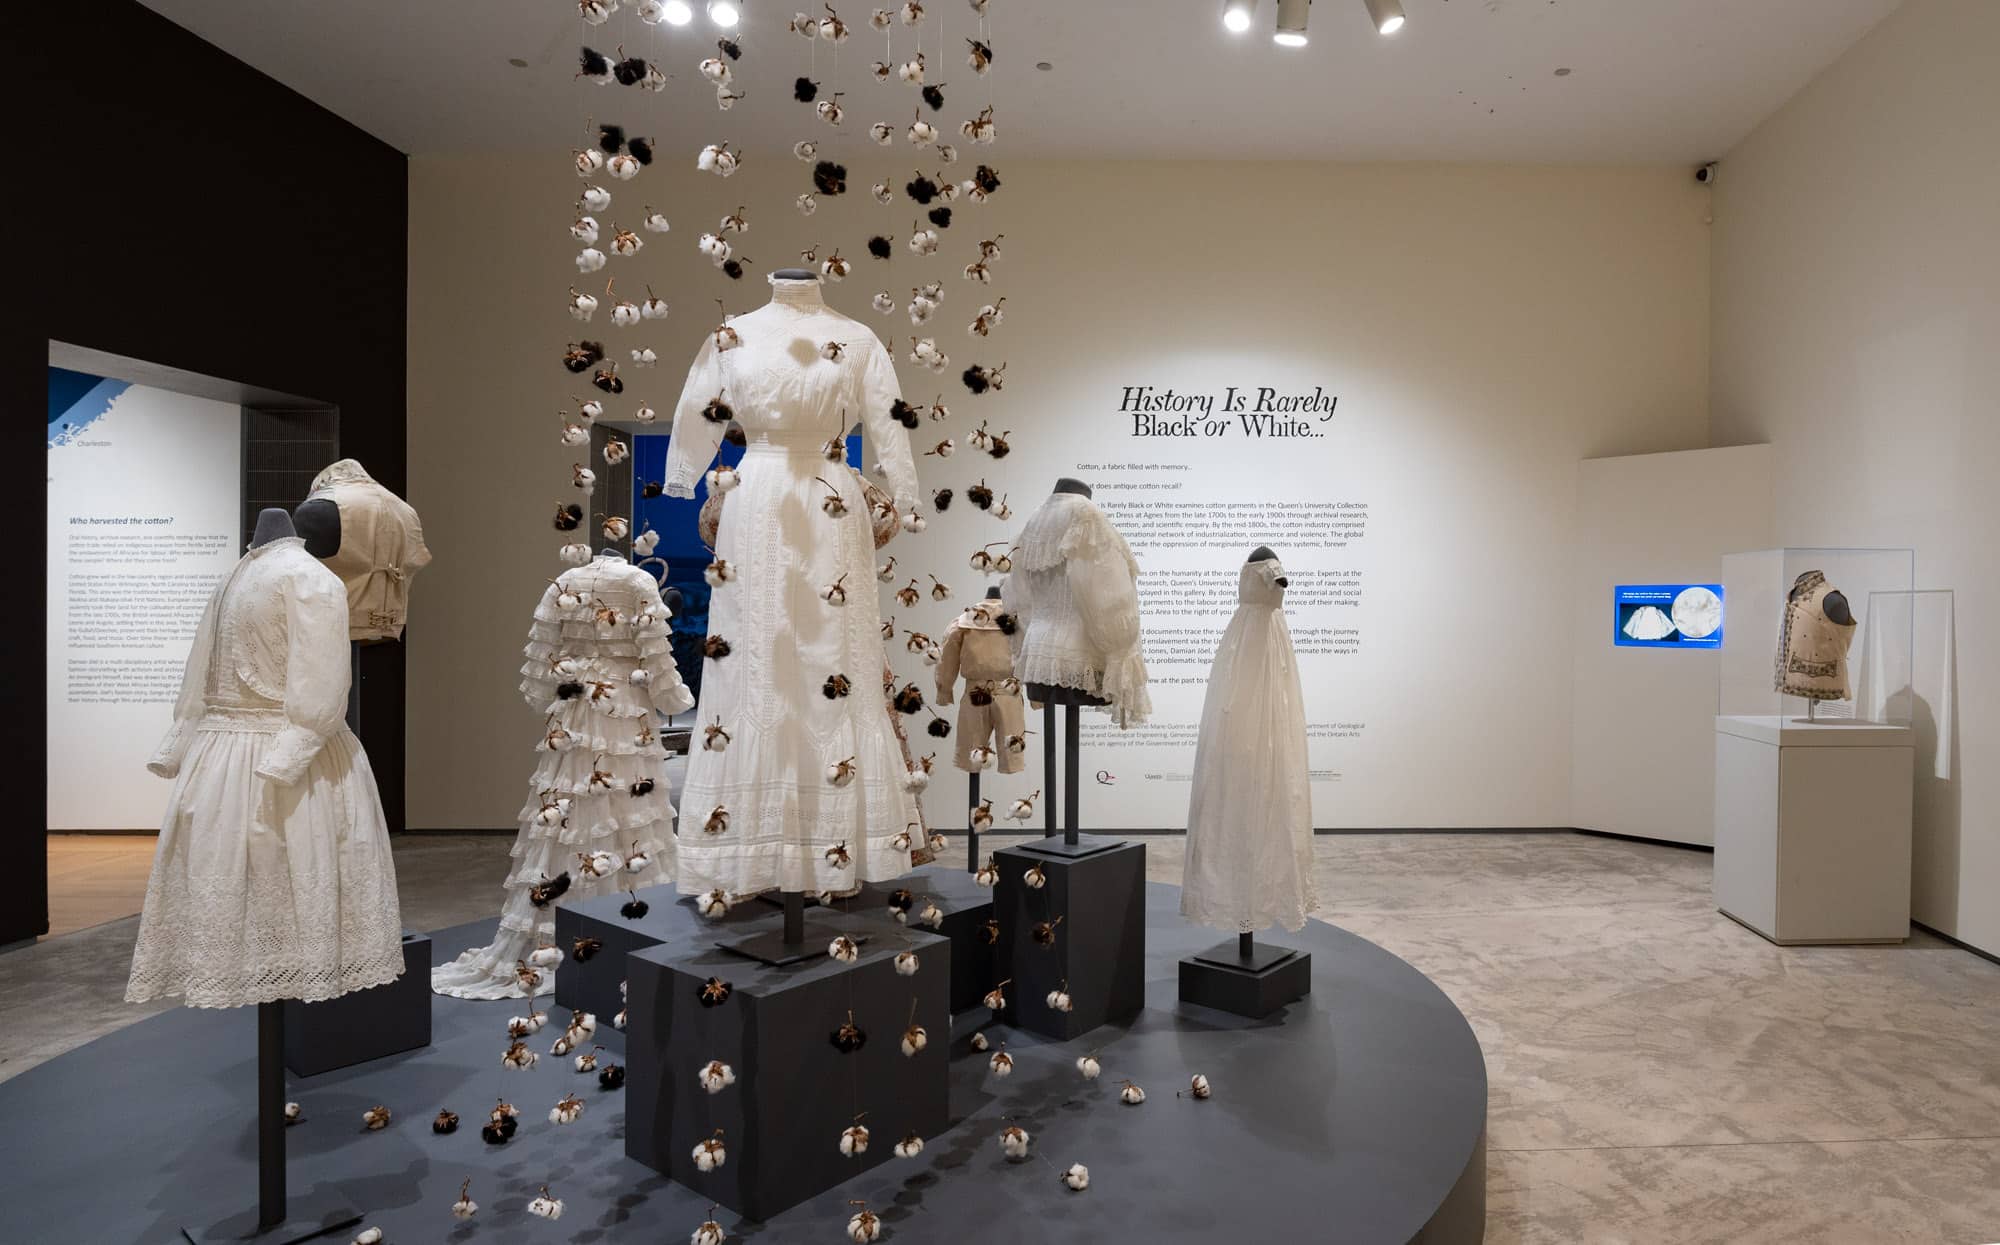 Installation view of History Is Rarely Black or White.